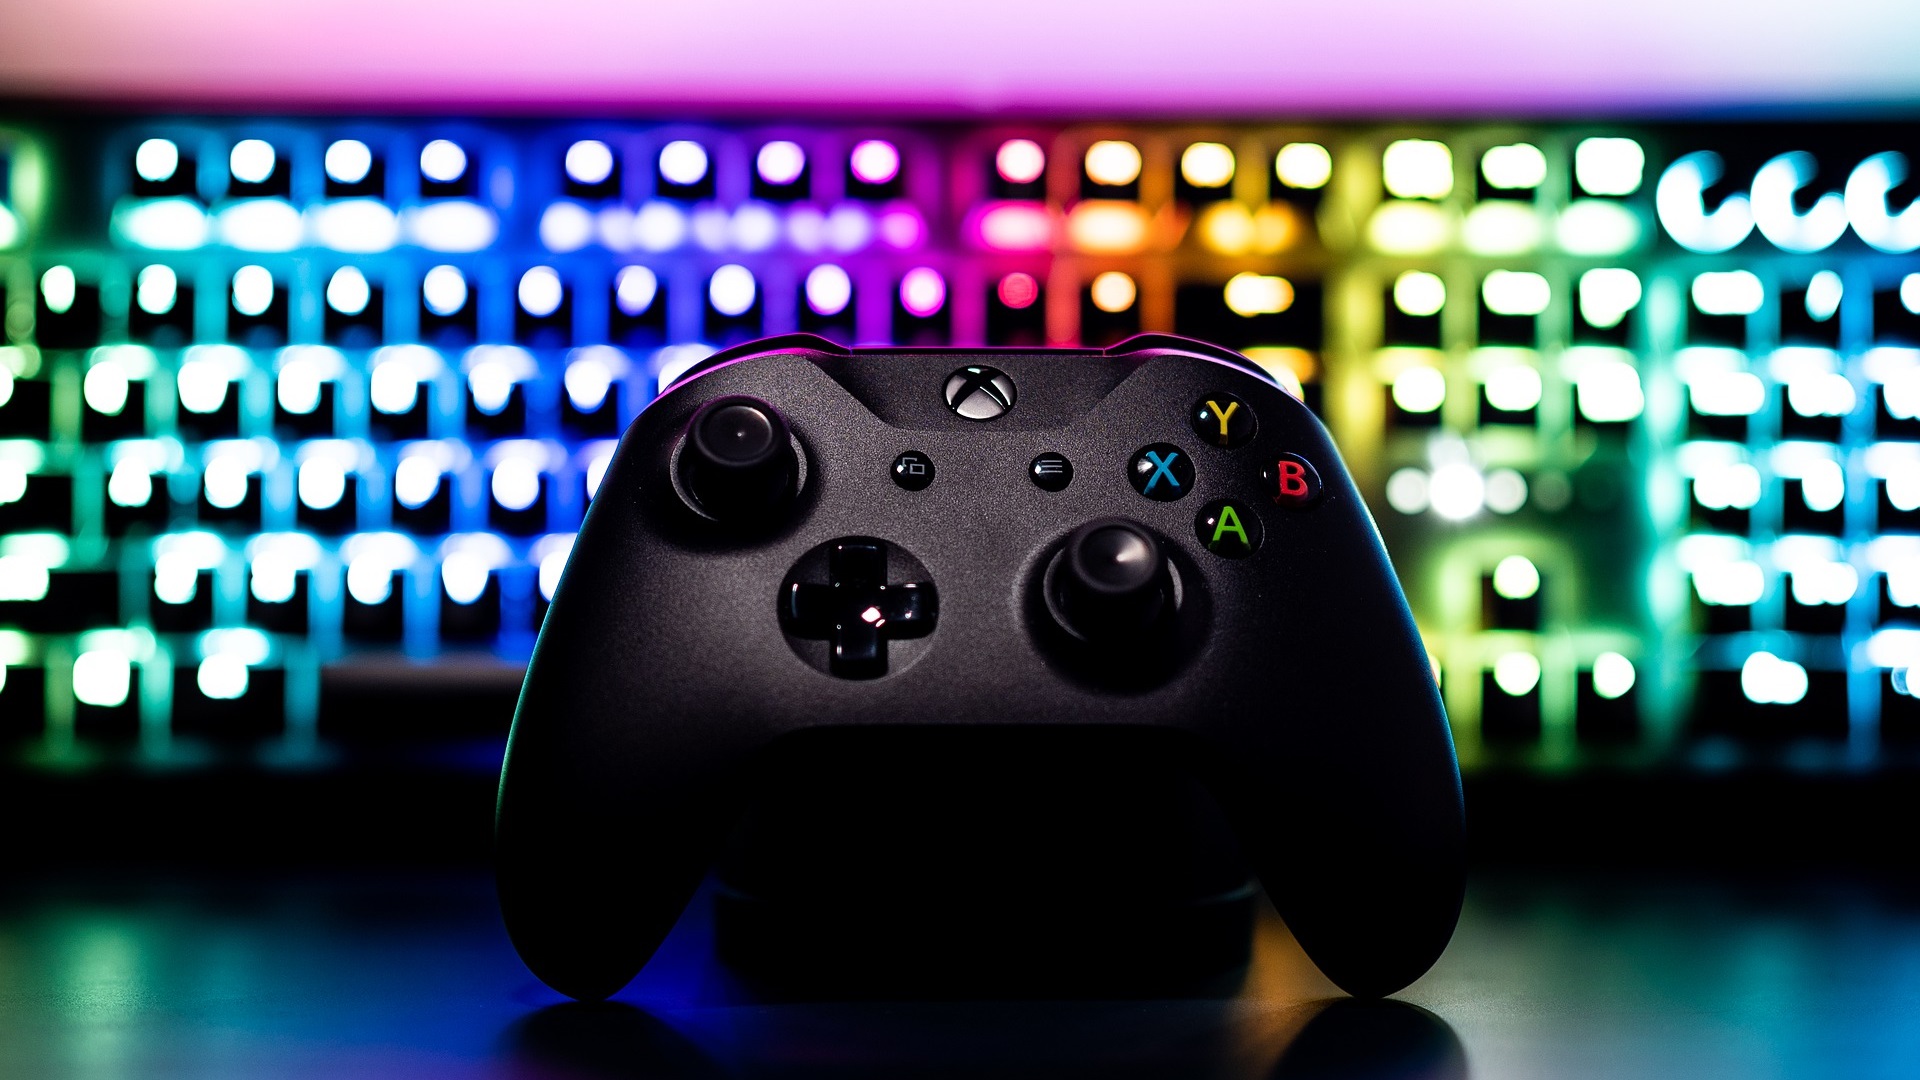 XBOX Controller in front of an RGB keyboard